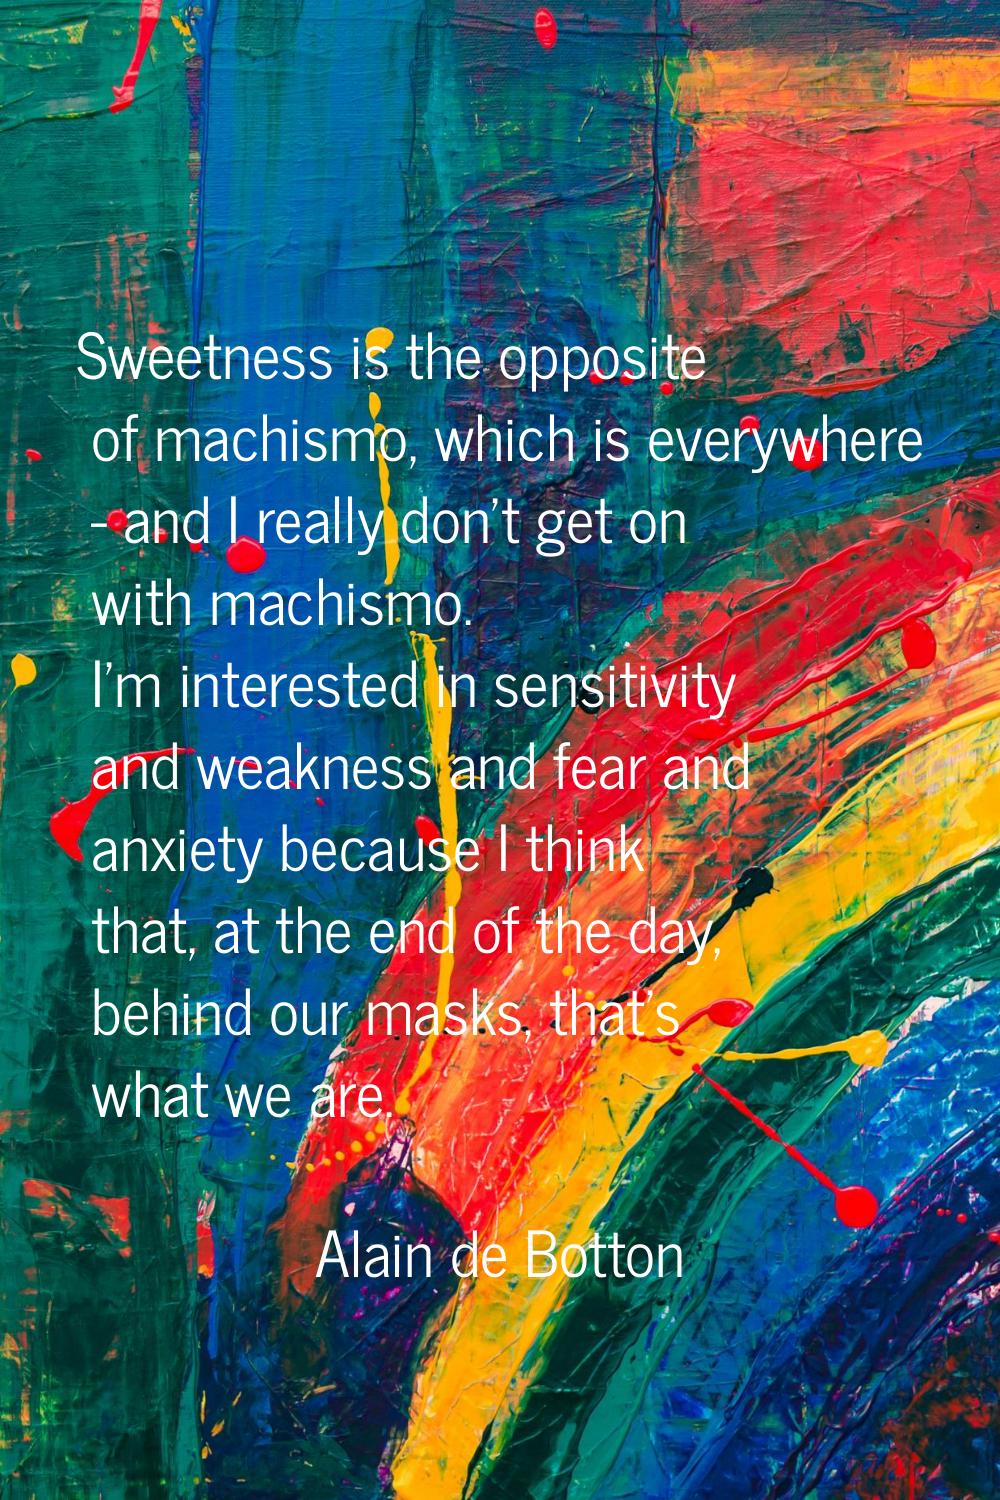 Sweetness is the opposite of machismo, which is everywhere - and I really don't get on with machism